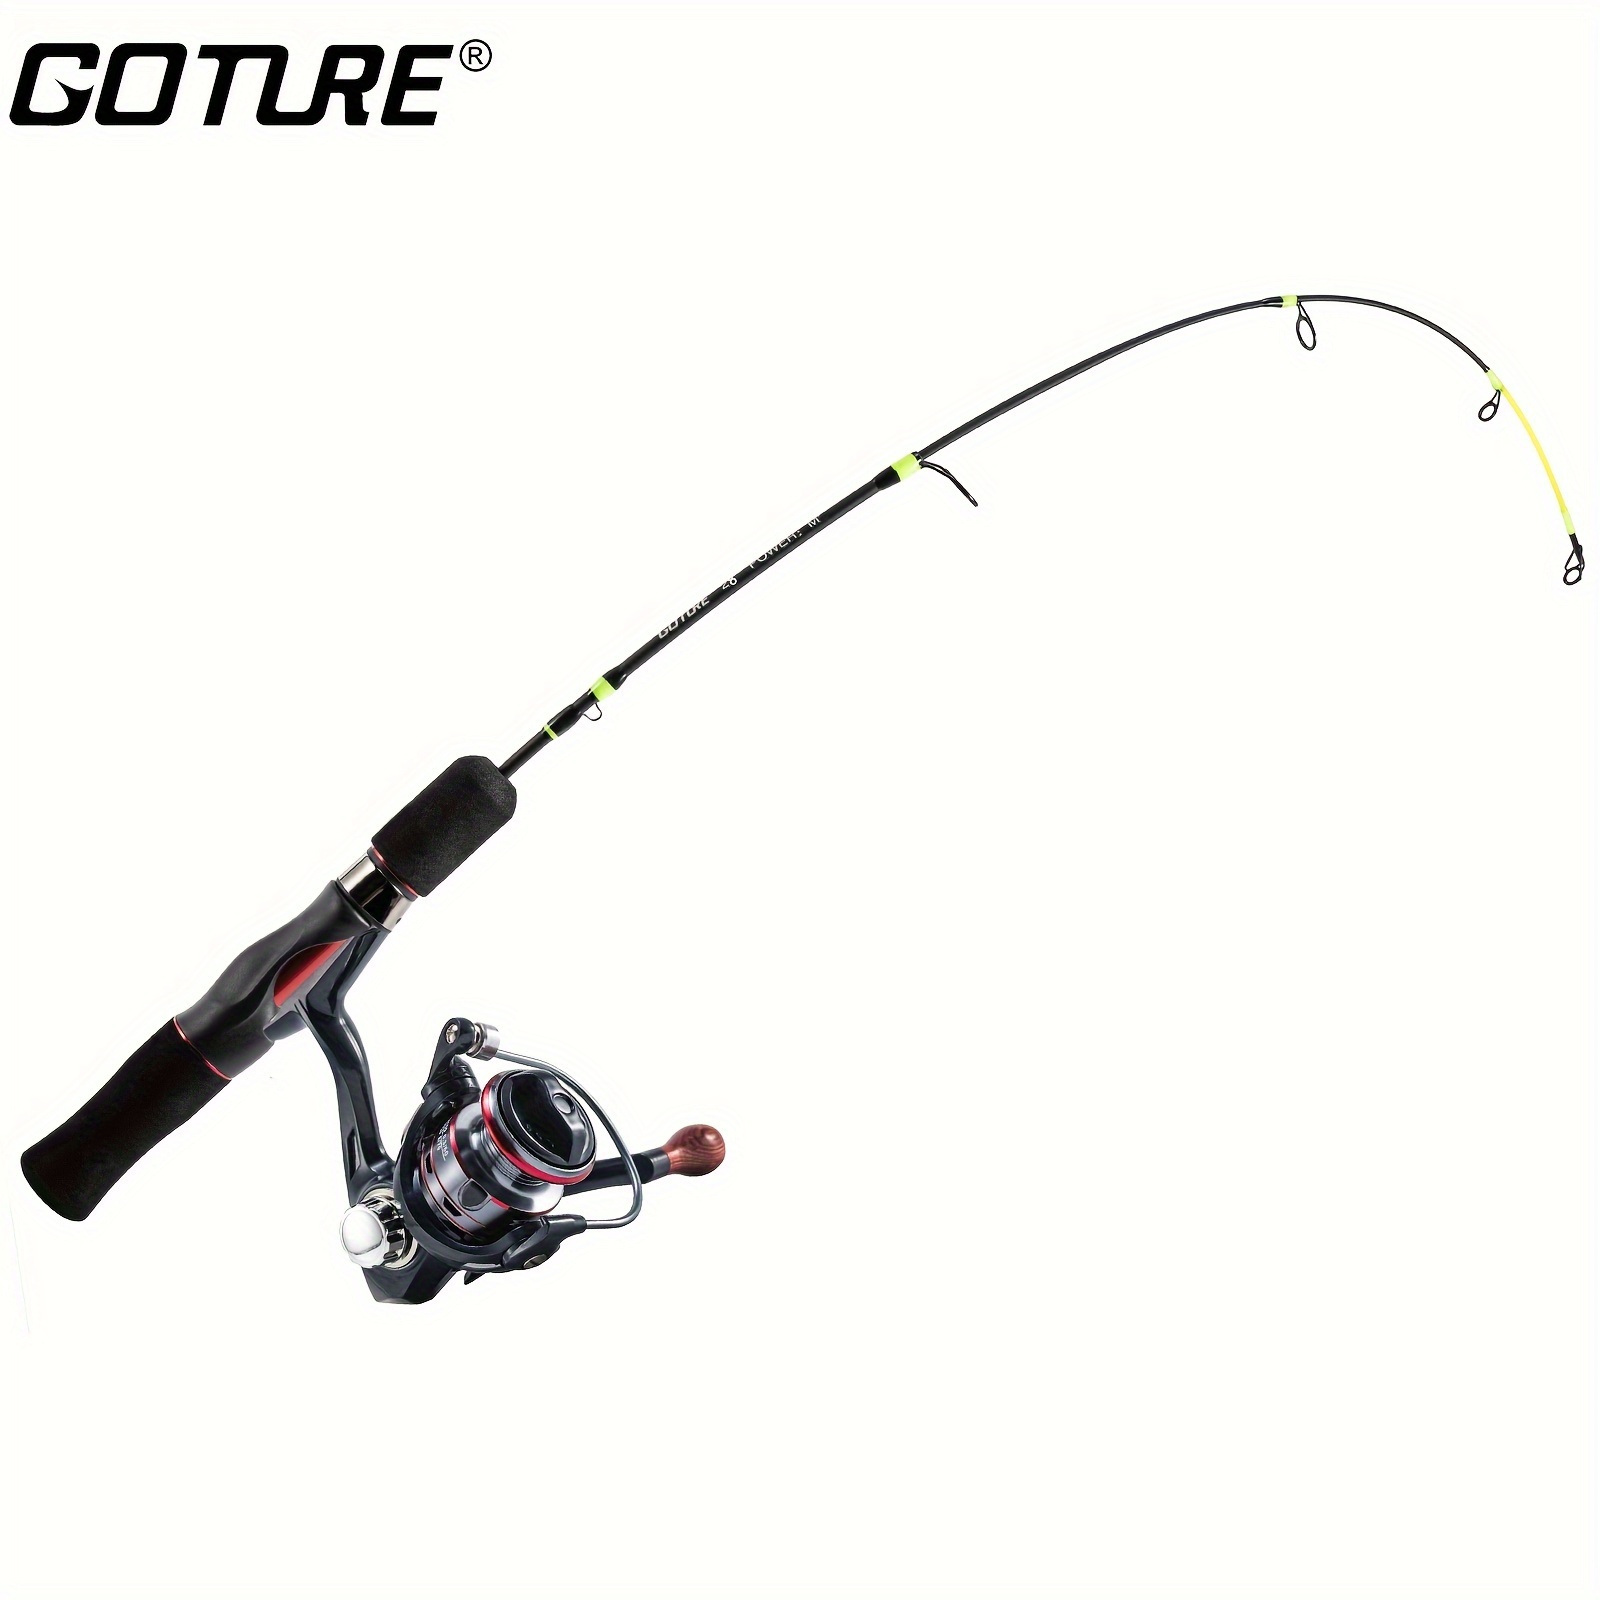 Goture Ice Fishing Reel & Rod Combo, Including 68.58cm/27'' Lightweight  Fishing Rod, 5.2:1 Gear Ratio Spinning Reel, Fishing Tackle For Winter  Fishing